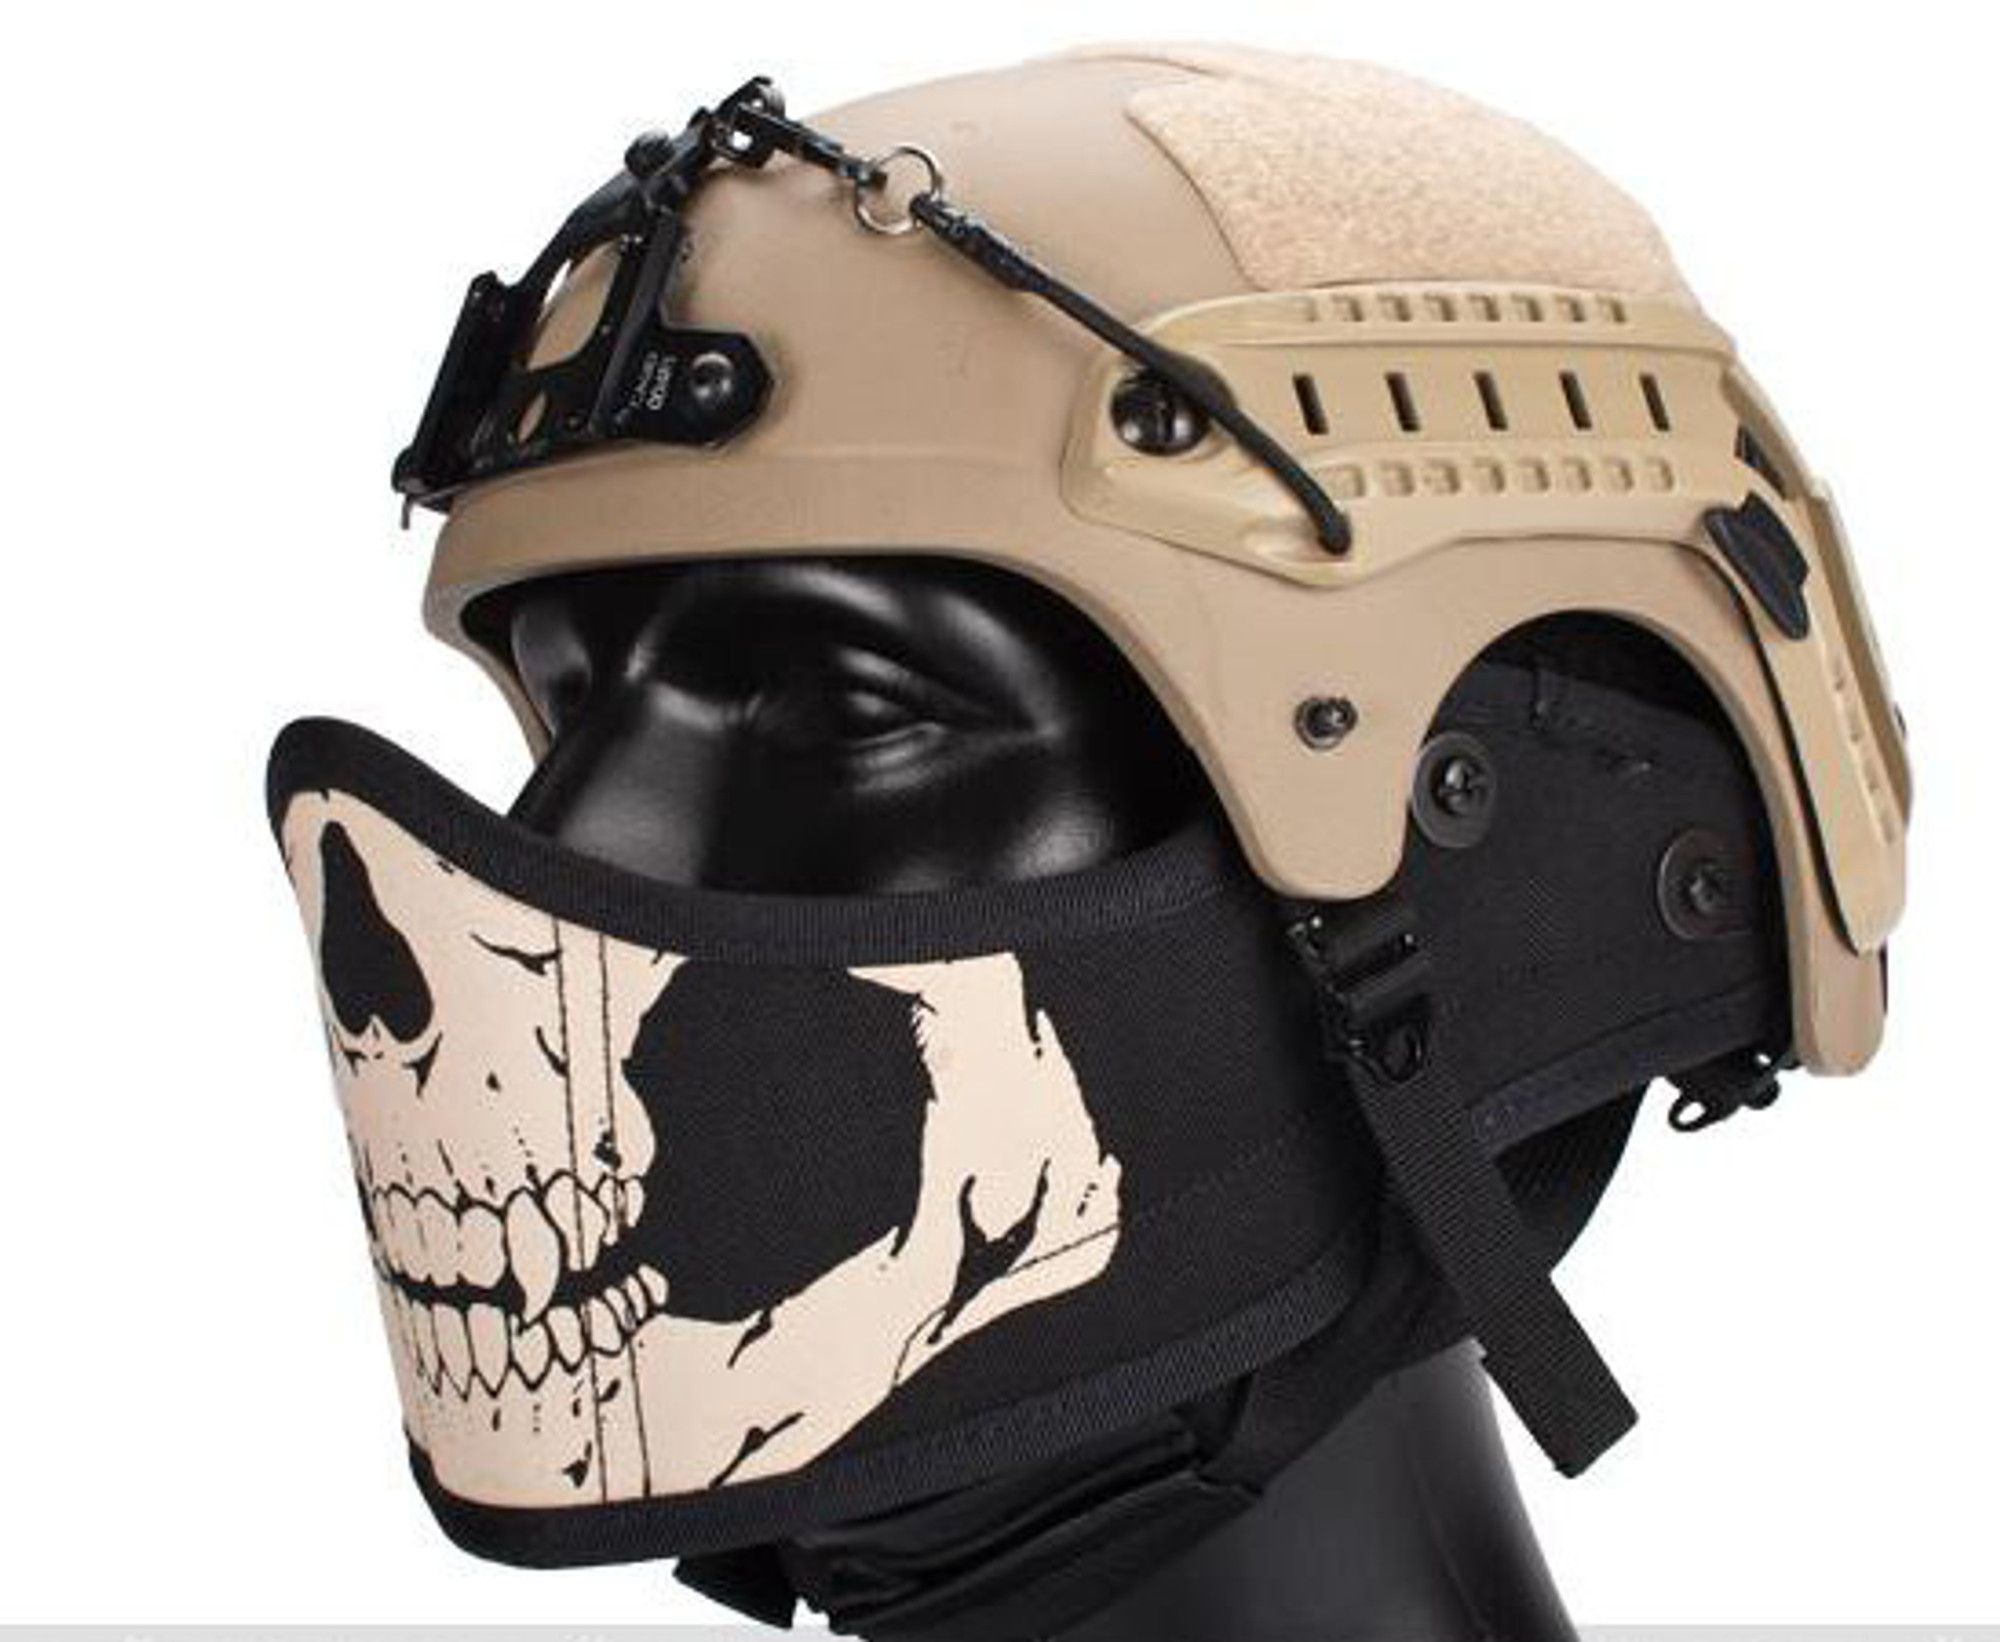 Avengers Helmet Face Armour HAF Mask for Airsoft (Color: Skull)